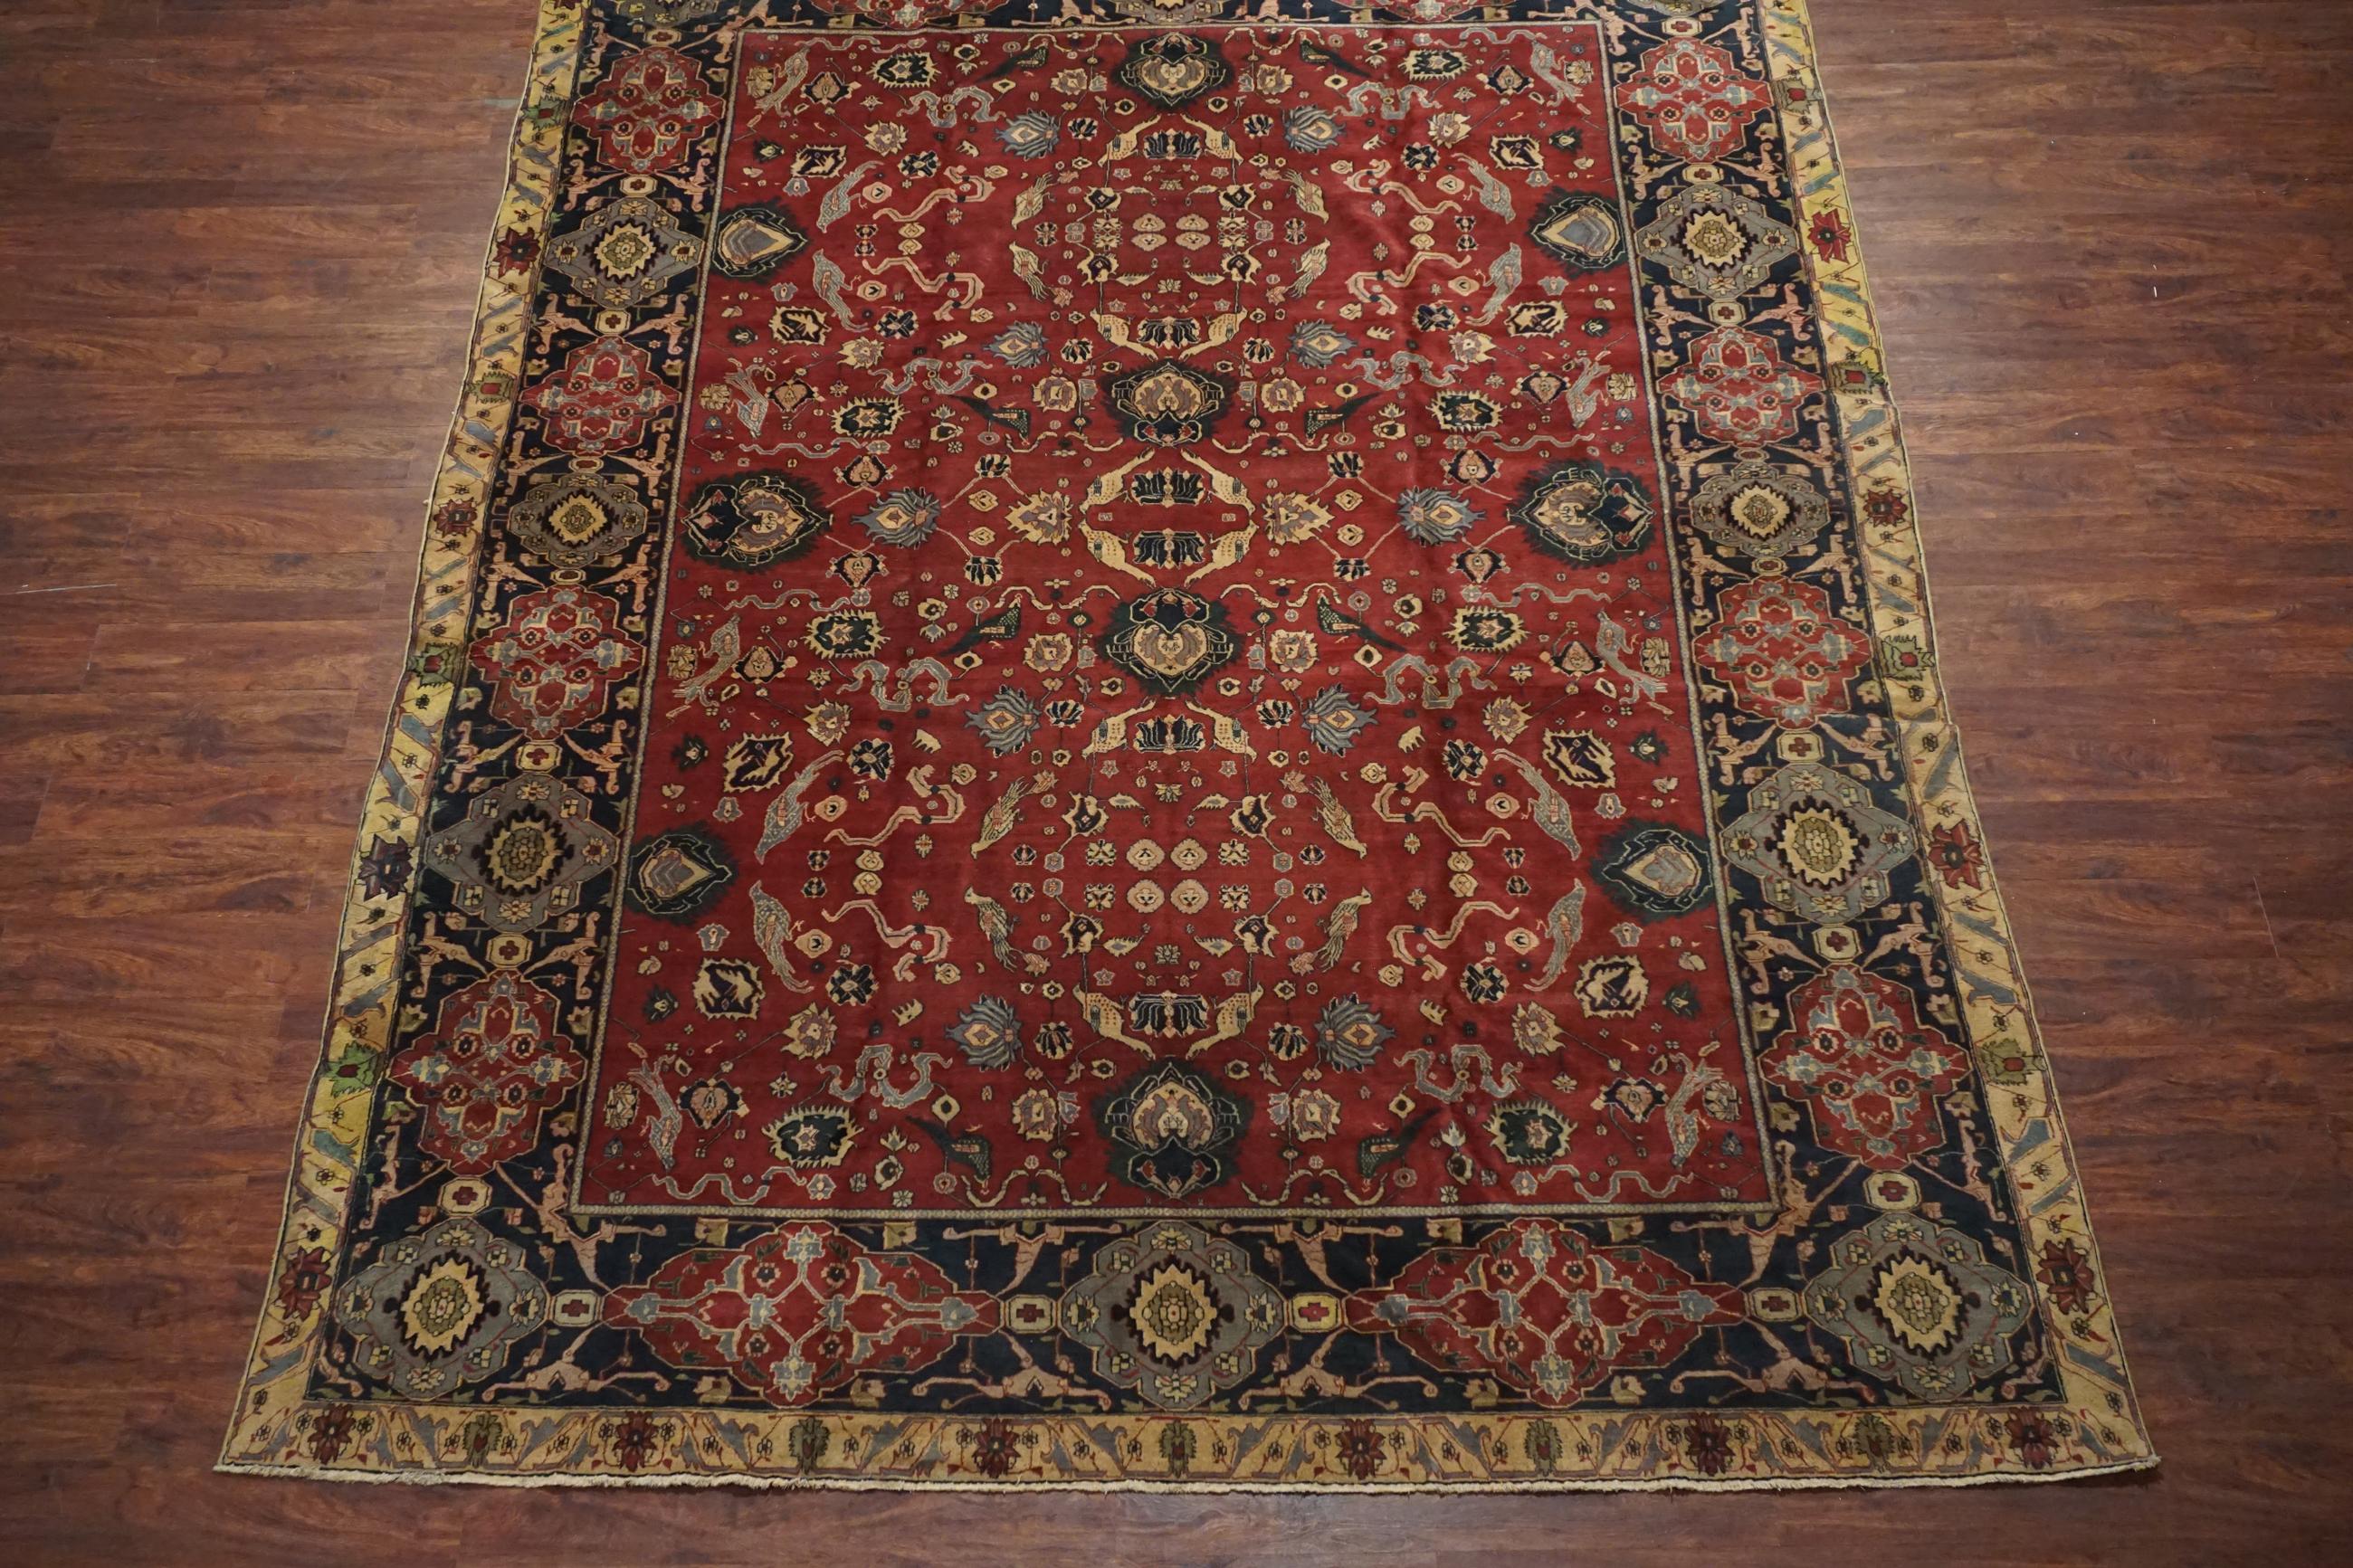 Hand-knotted wool pile on a cotton foundation - 400 KPSI.

Circa 1910.

Dimensions: 8'10